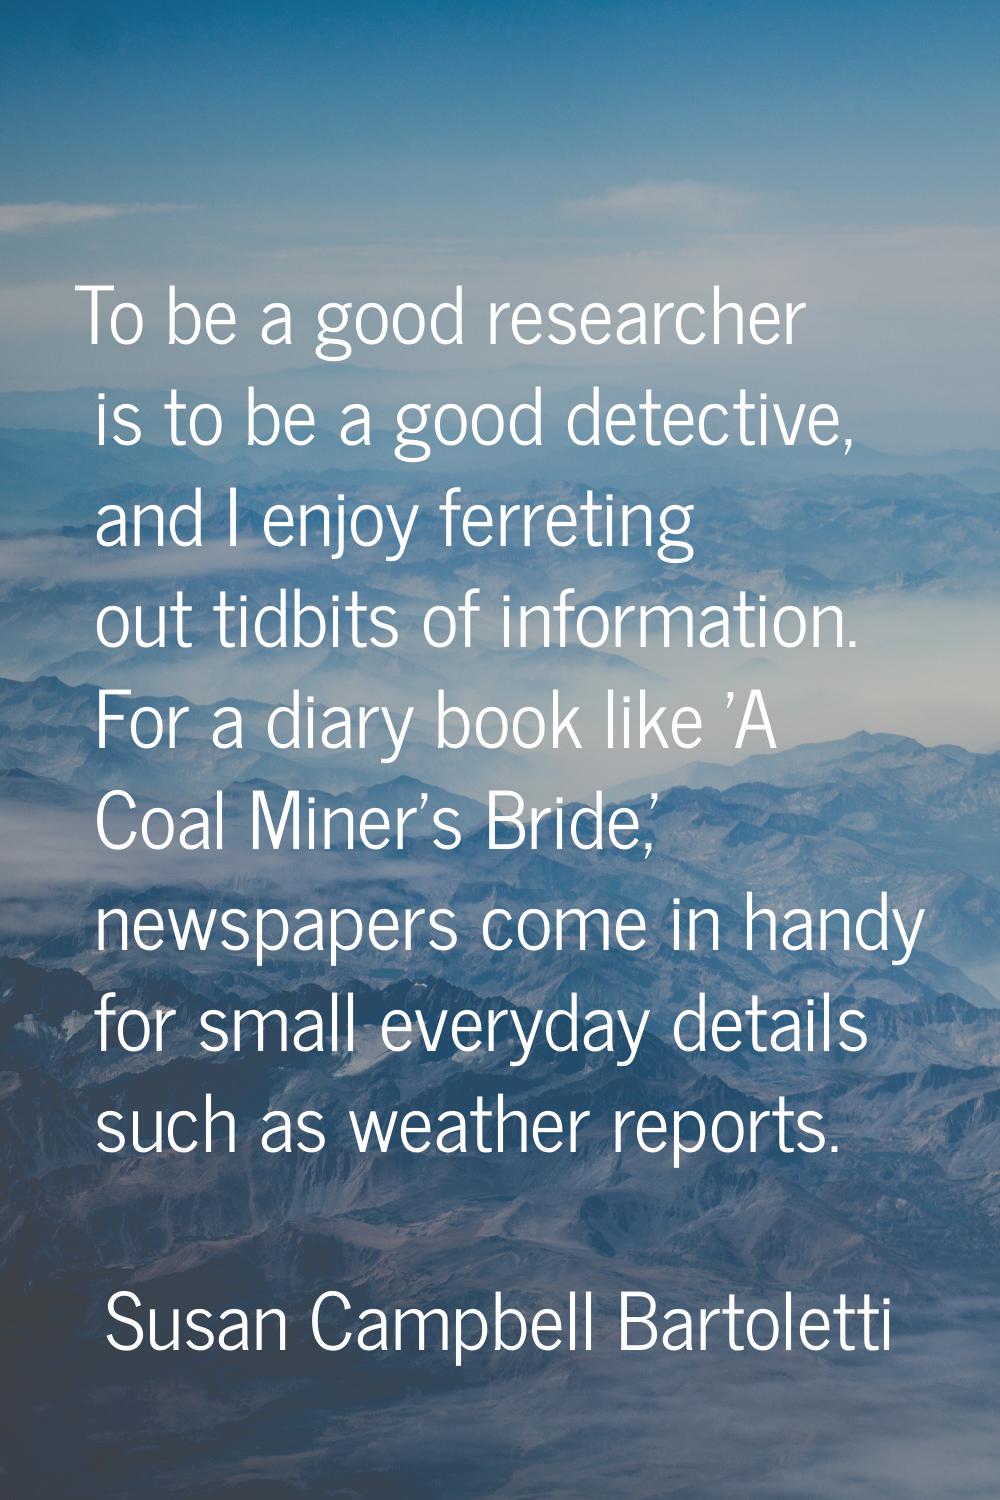 To be a good researcher is to be a good detective, and I enjoy ferreting out tidbits of information